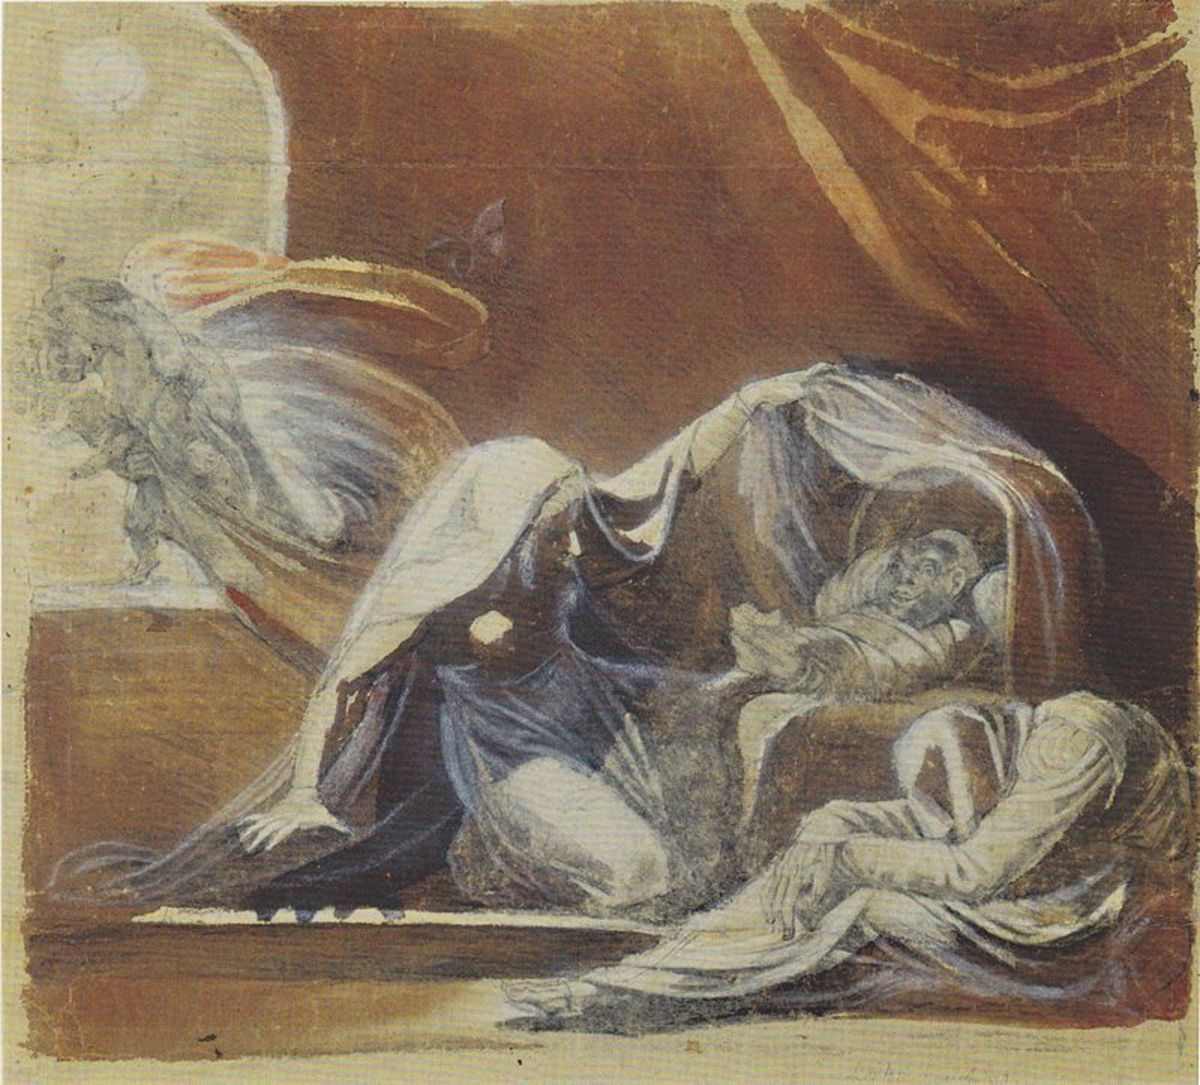 Henry Fuseli's "Der Wechselbag" (1781). George II thought Frederick was one and Queen Caroline argued that her grandchild could be one. They're from European folklore.